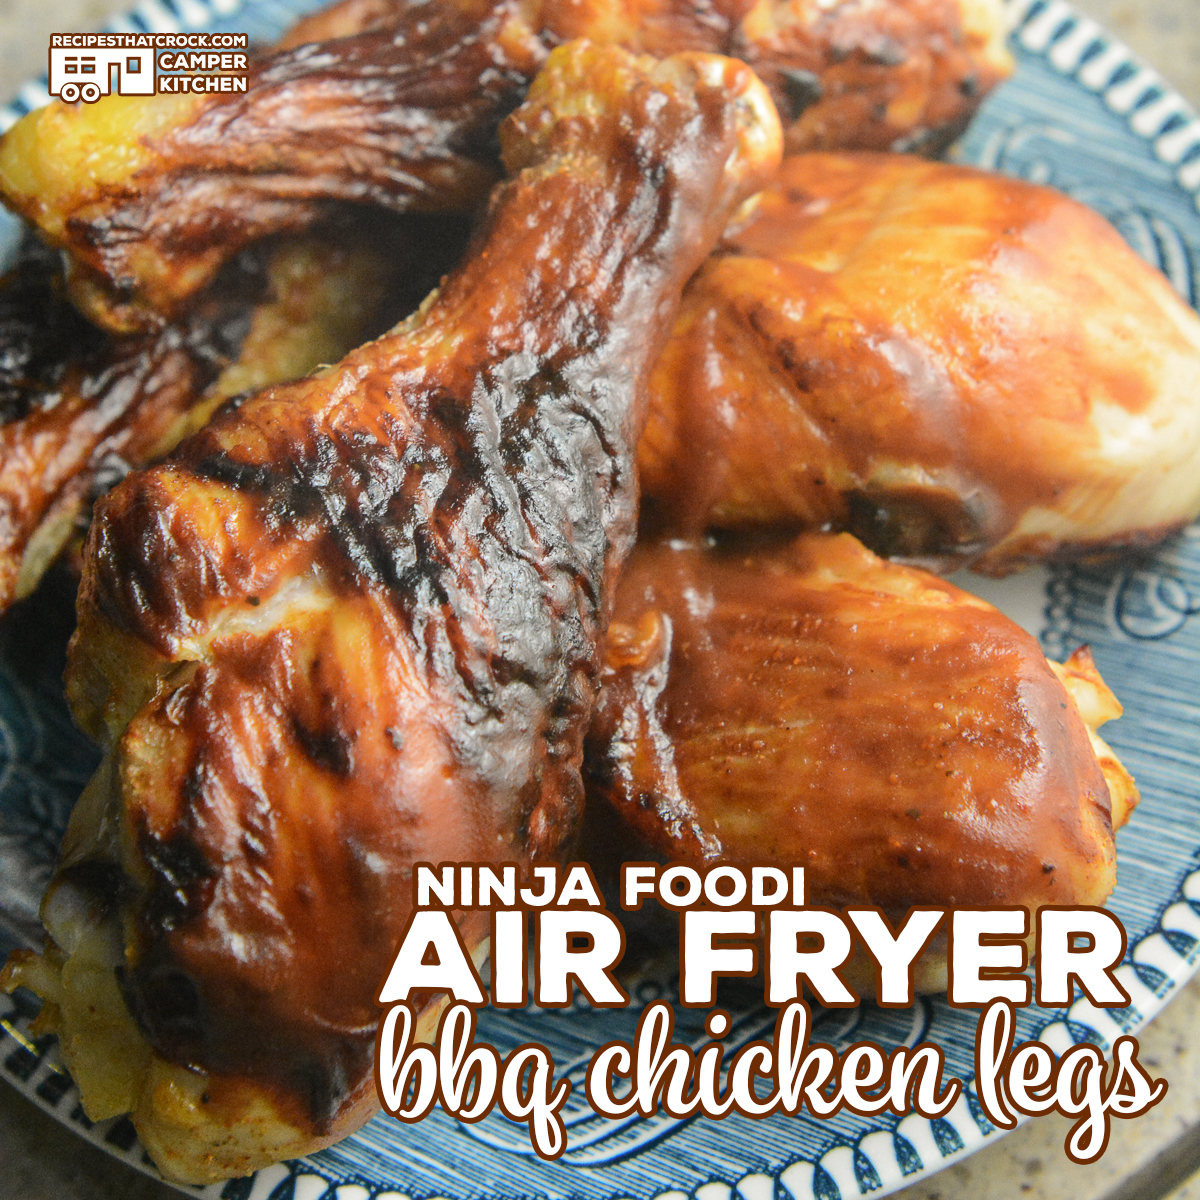 Air Fryer BBQ Chicken Legs are so easy to cook up in your Ninja Foodi or traditional air fryer. Use your favorite barbecue sauce. Low carb options.